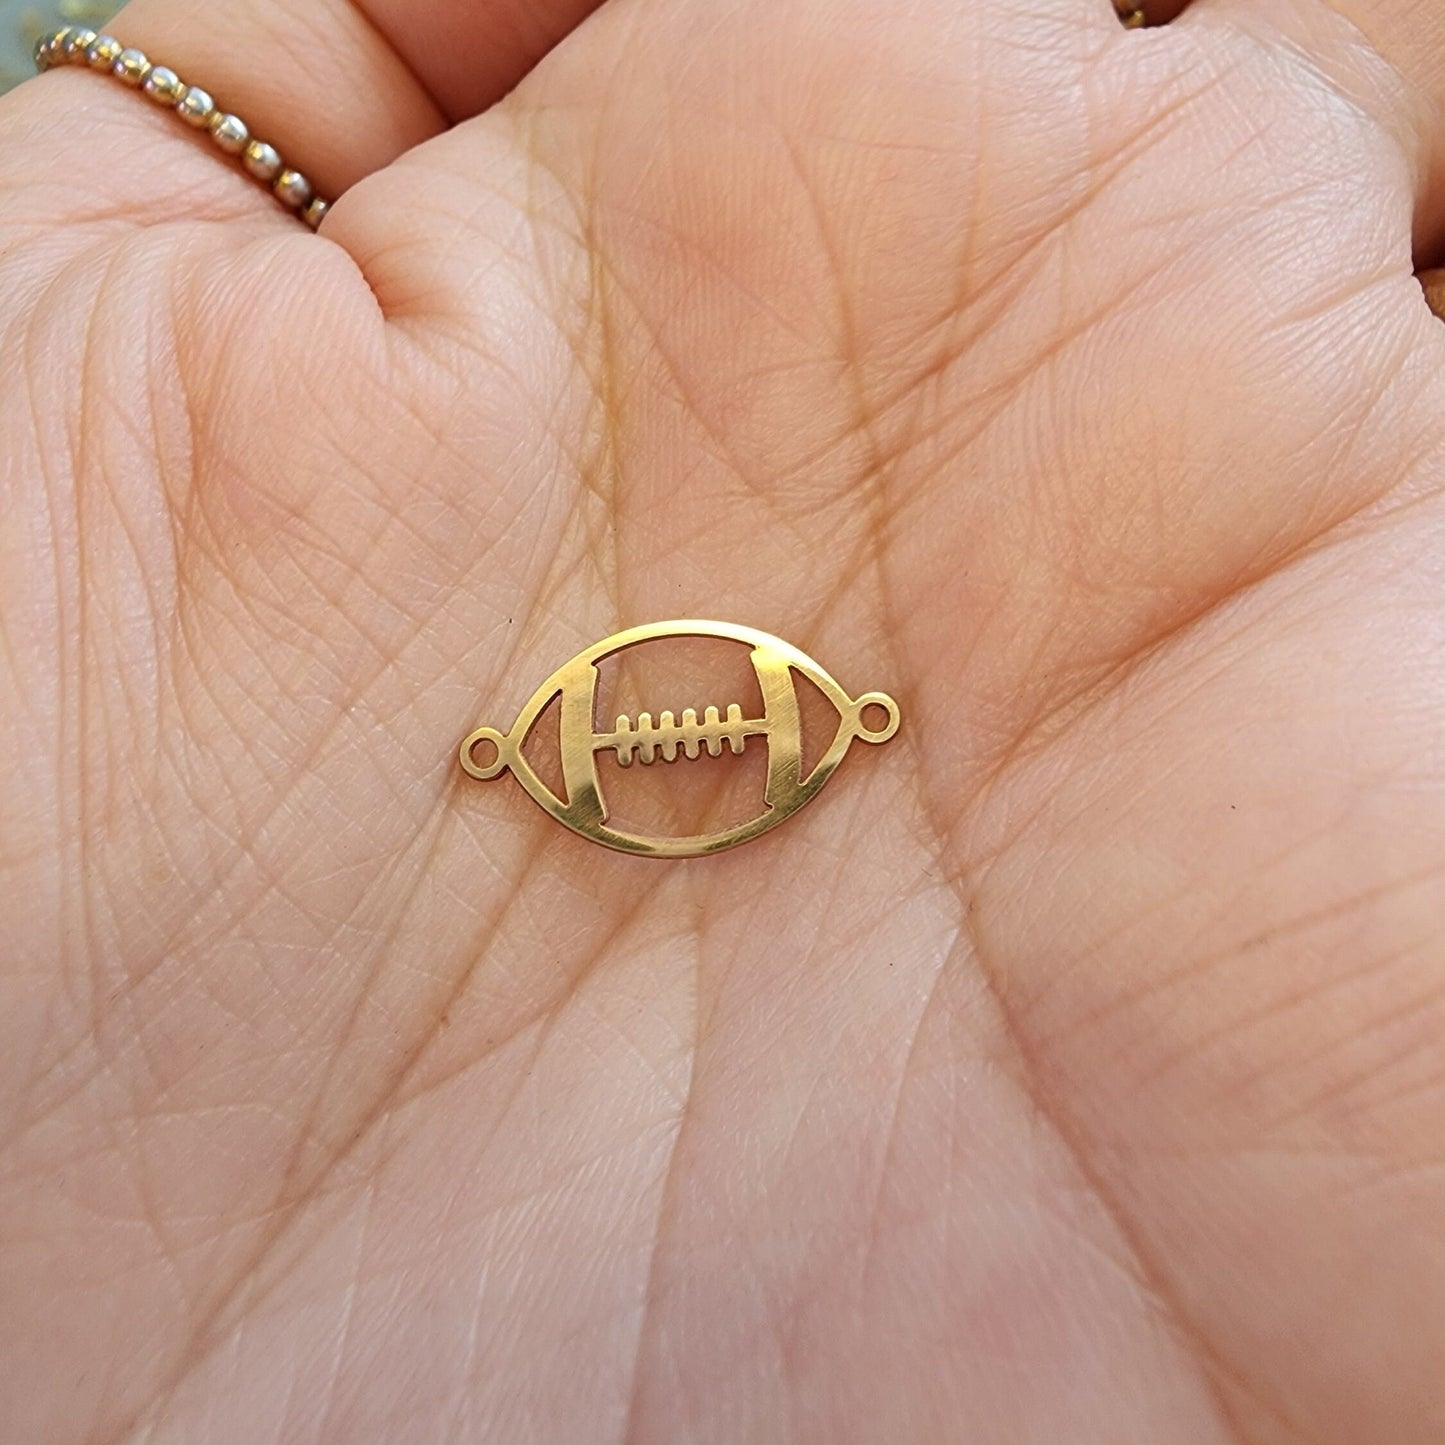 gold filled football connector - permanent jewelry word connectors- sports connectors charms - tres carmela